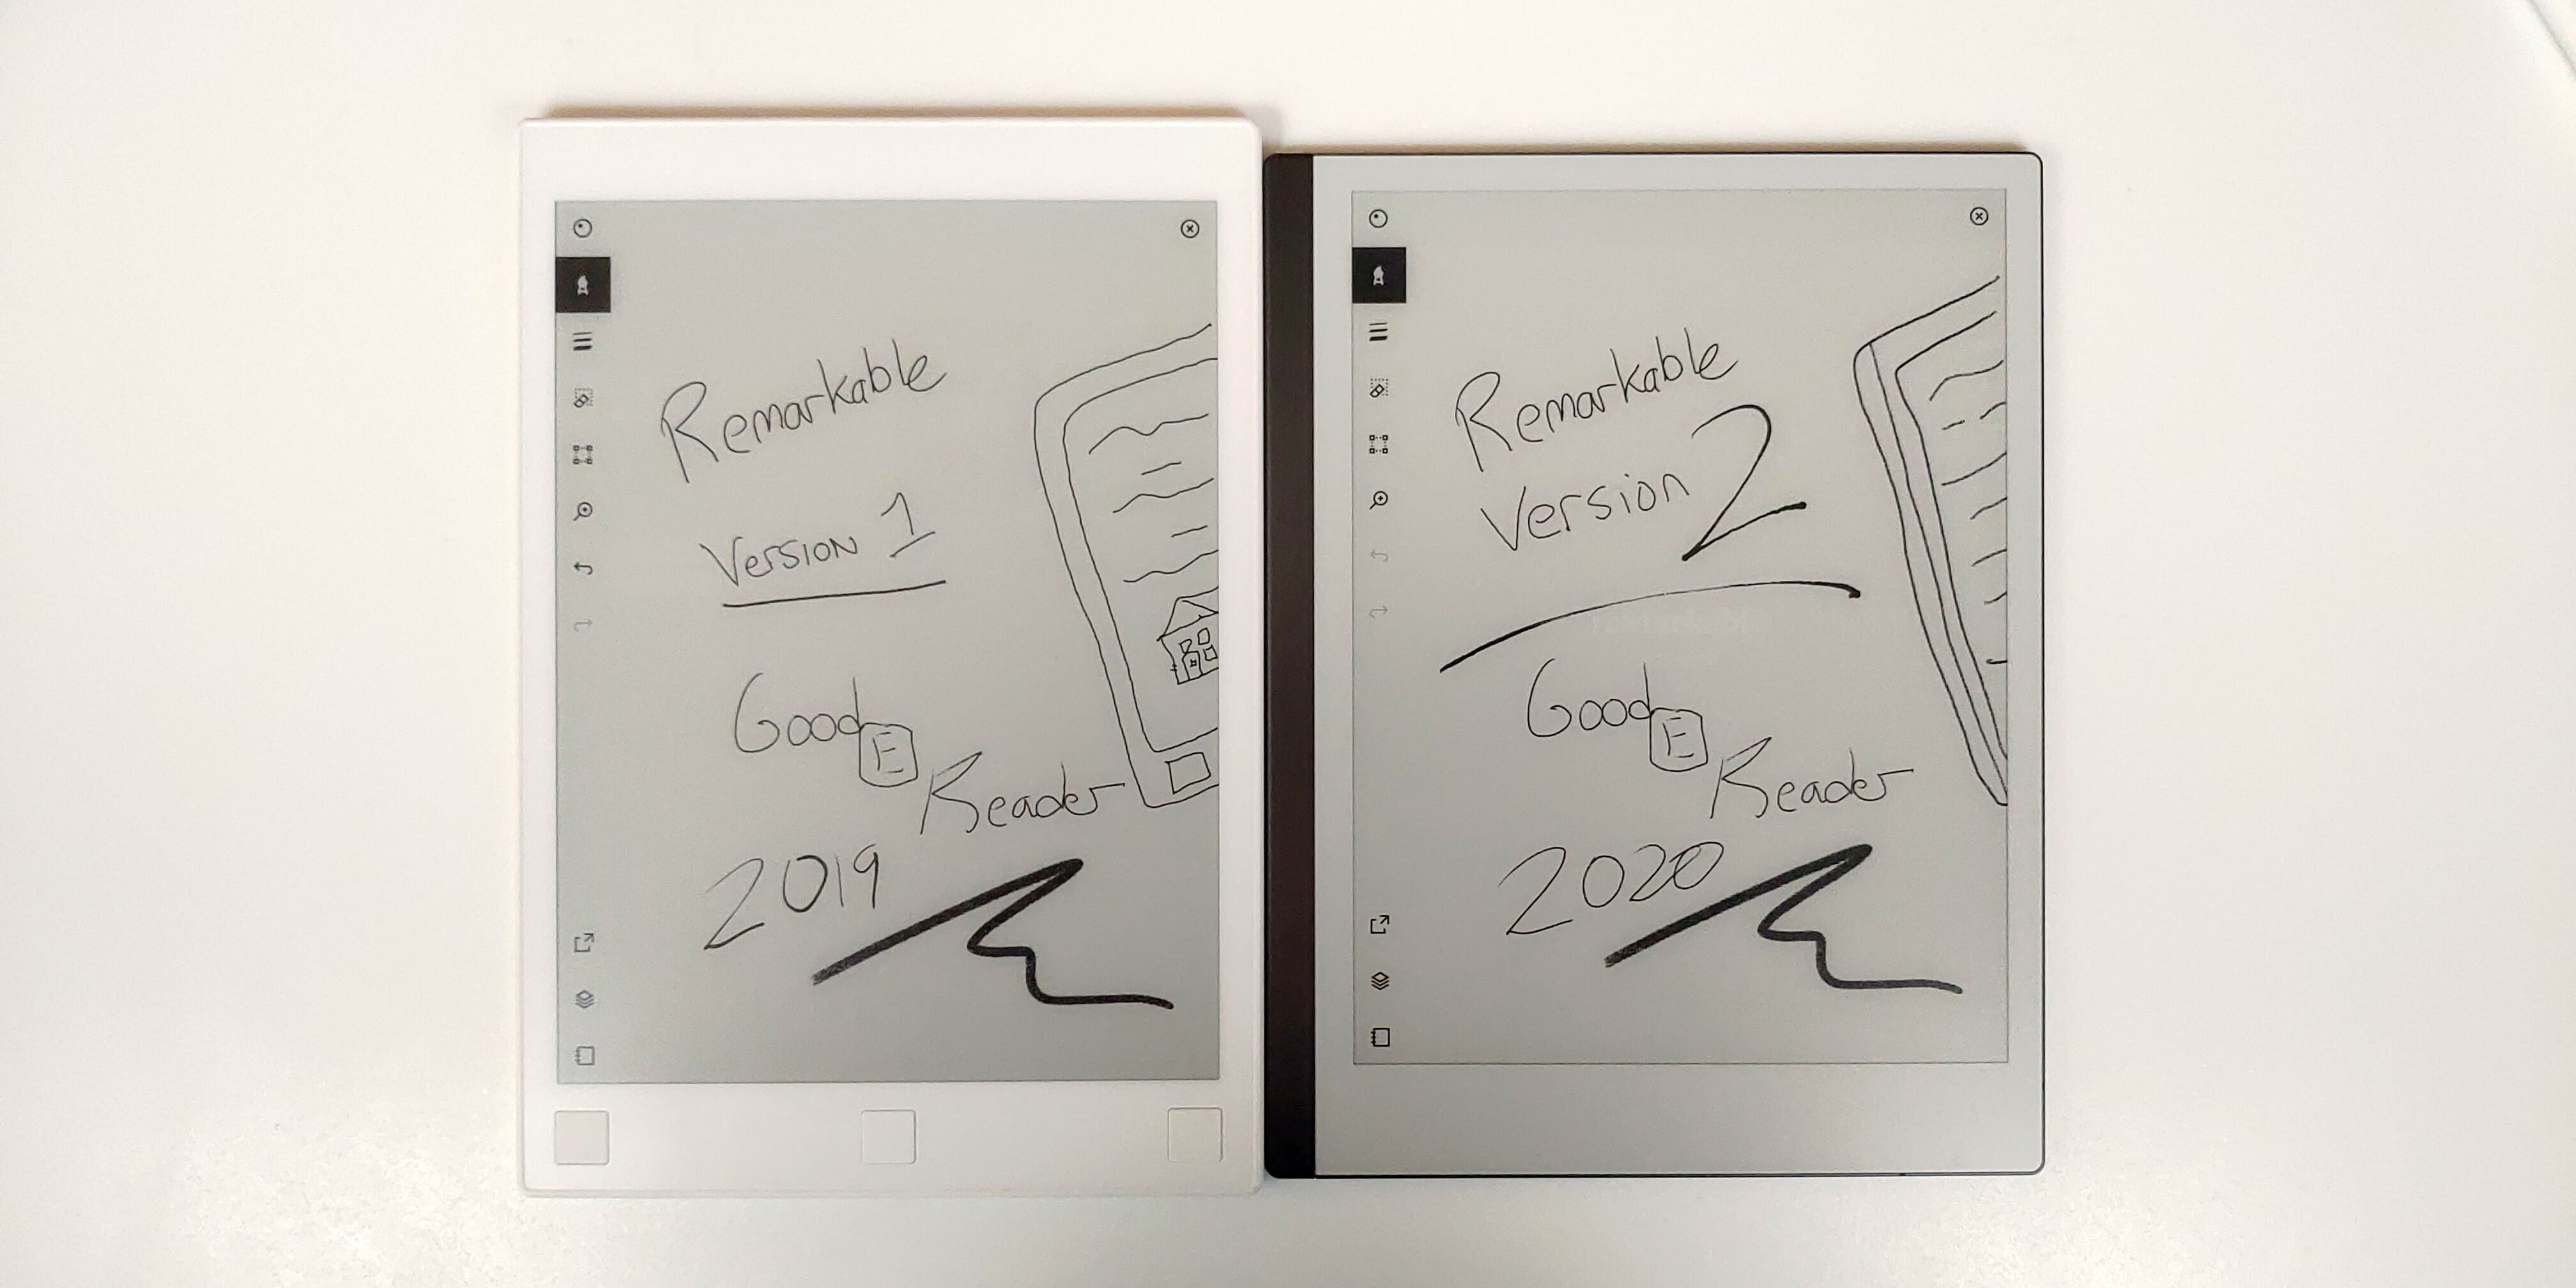 Remarkable 1 vs Remarkable 2 – Which one should you buy? - Good e-Reader